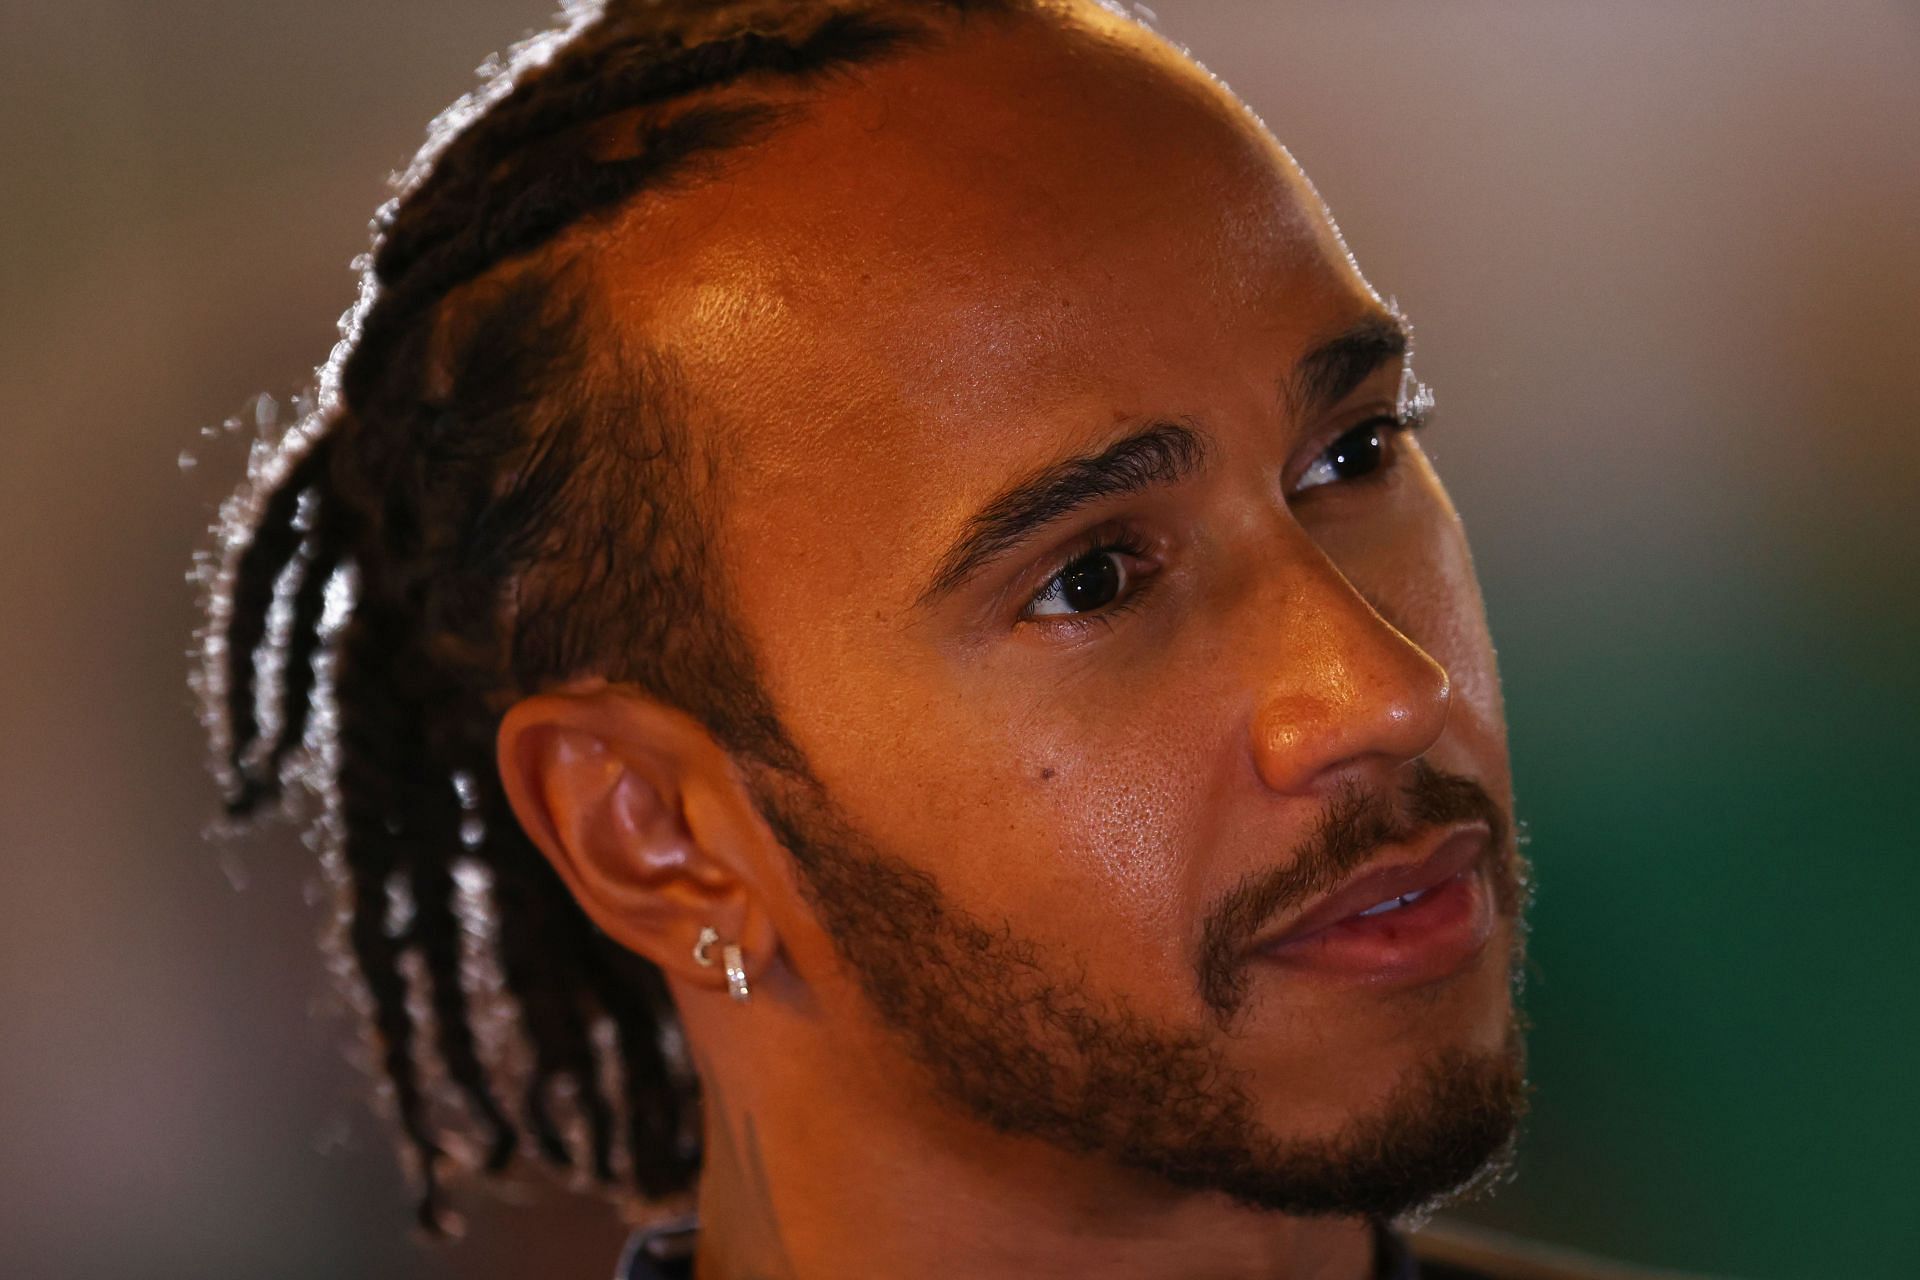 Lewis Hamilton in the F1 paddock at the Yas Marina circuit in Abu Dhabi. (Photo by Clive Rose/Getty Images)